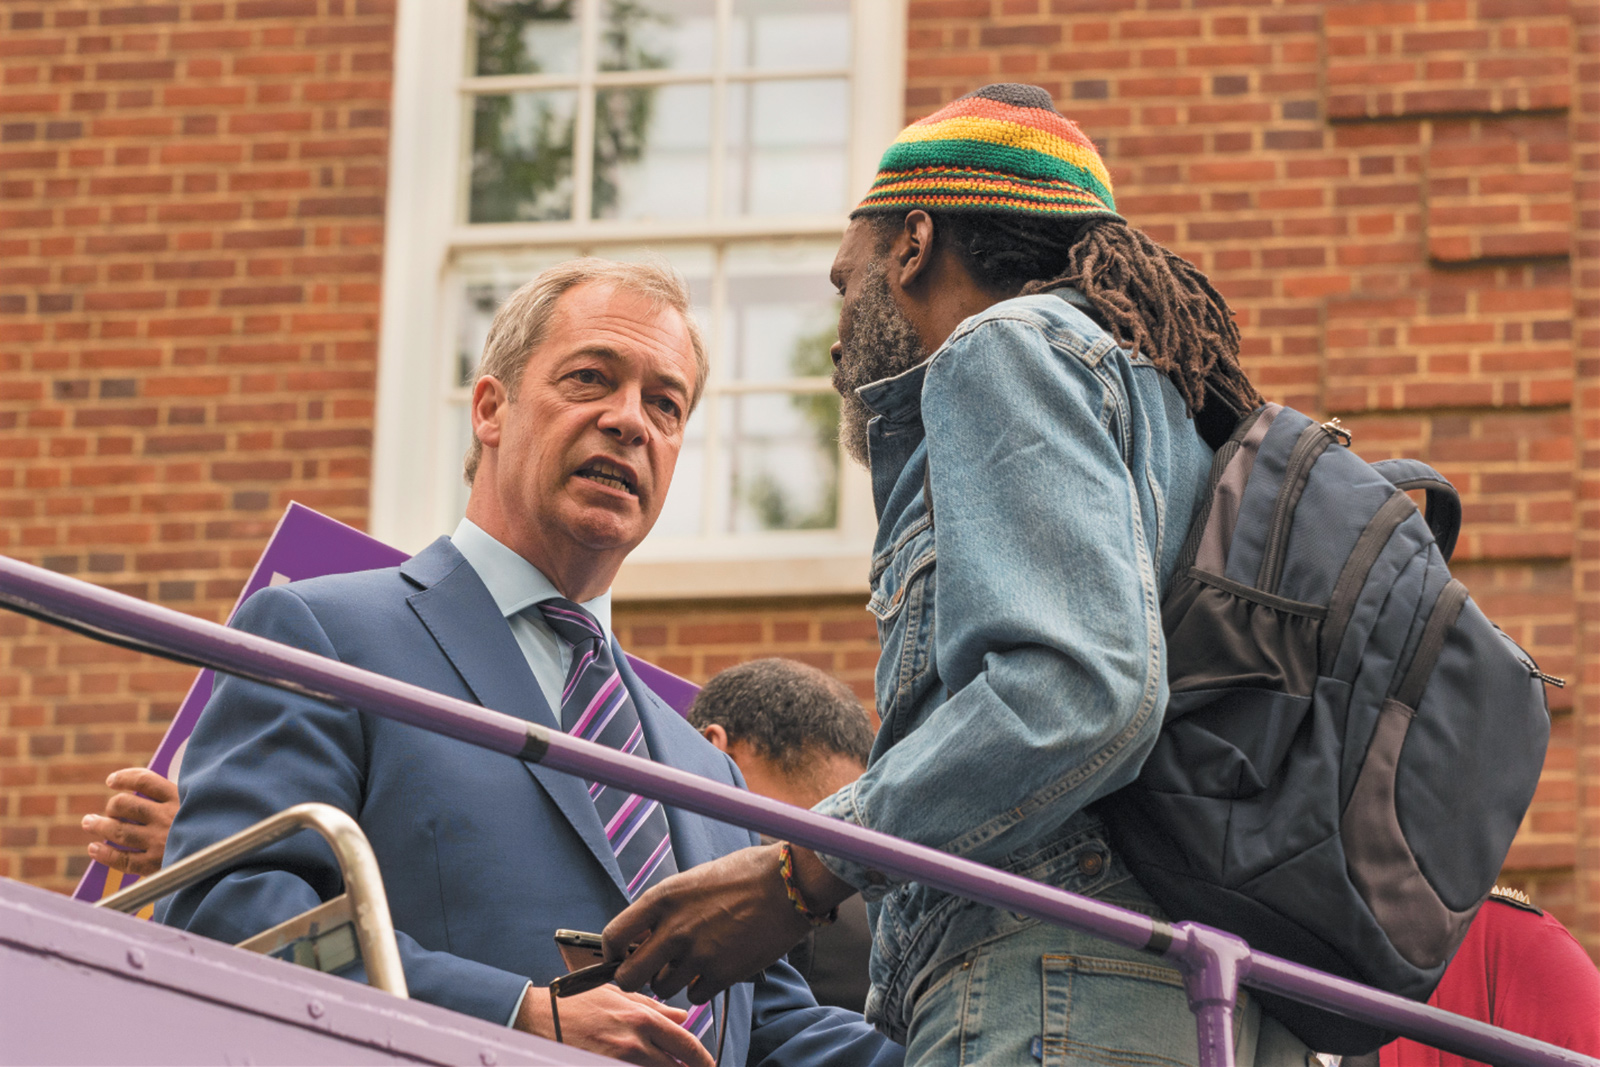 Nigel Farage canvassing for ‘Leave’ votes during the Brexit campaign, London, May 2016. He resigned as leader of the UK Independence Party on July 4, shortly after the referendum.